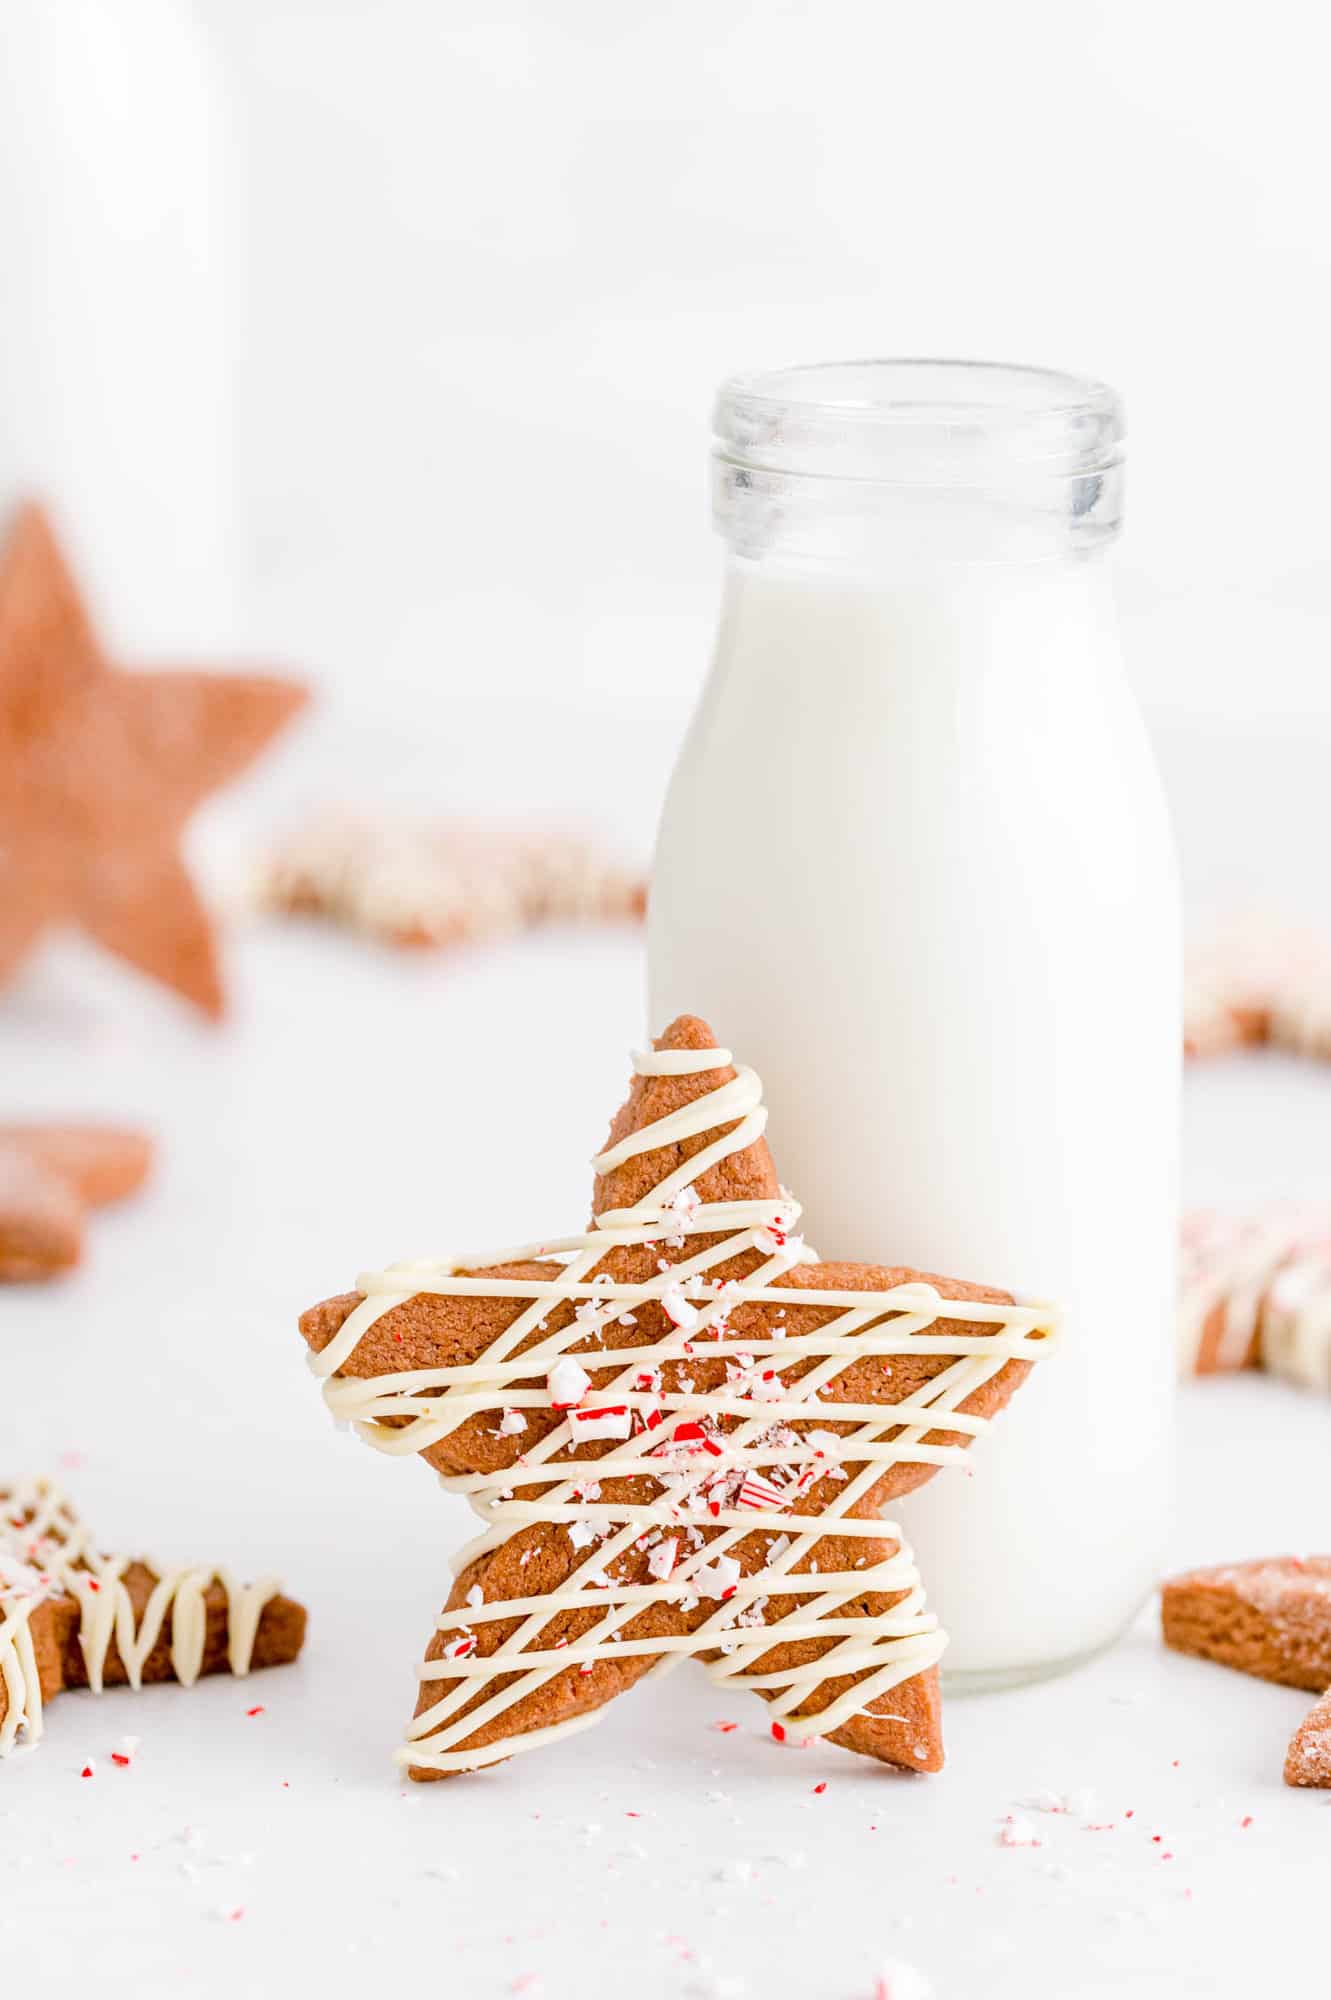 Star shaped chocolate cookie leaning against small bottle of milk.